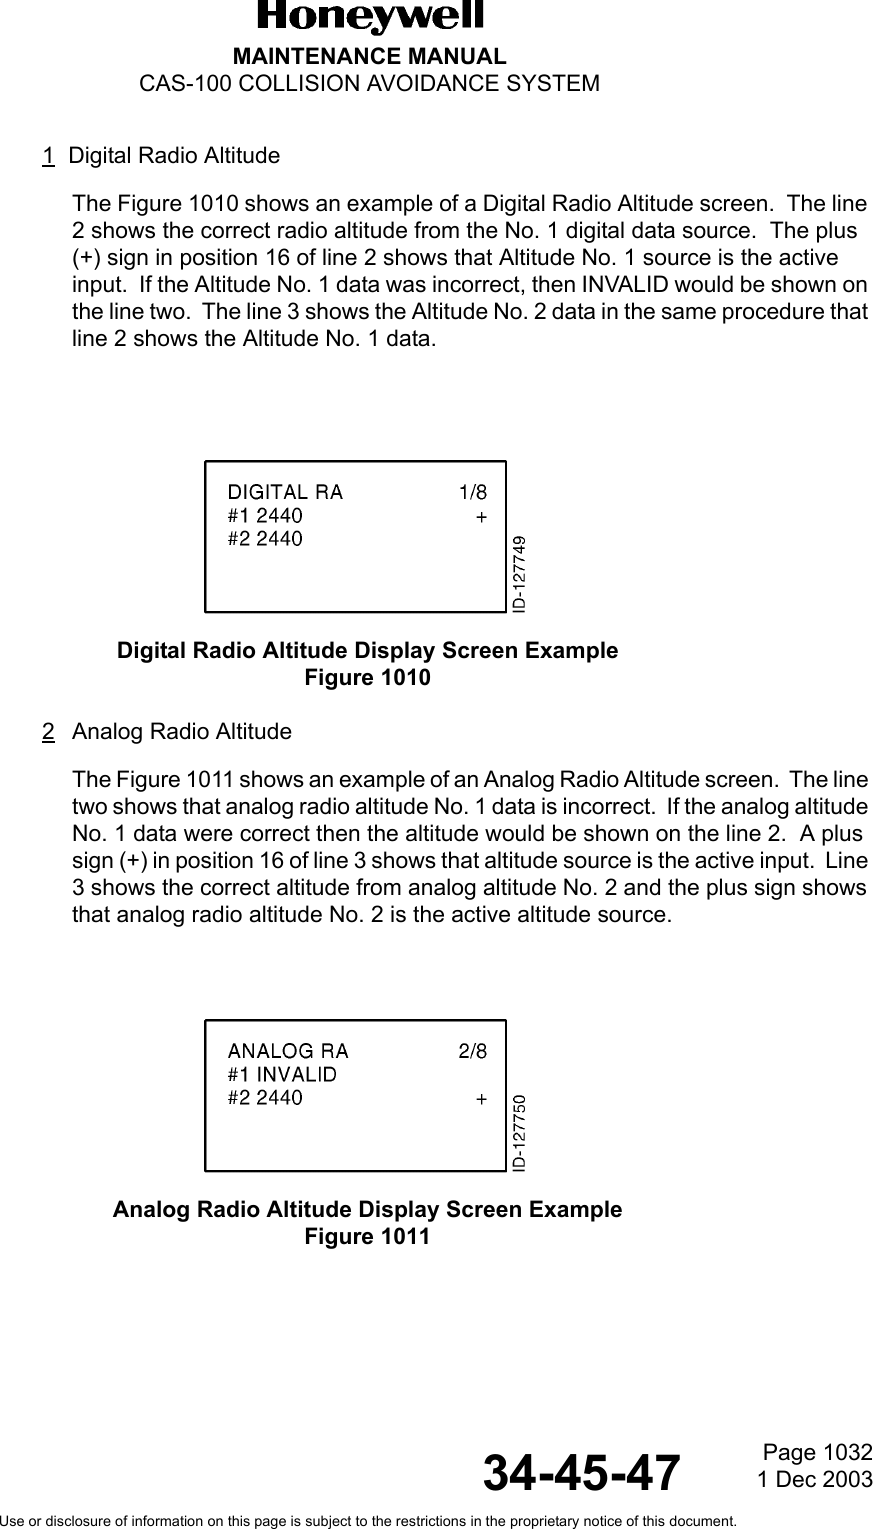 Page 10321 Dec 200334-45-47MAINTENANCE MANUALCAS-100 COLLISION AVOIDANCE SYSTEMUse or disclosure of information on this page is subject to the restrictions in the proprietary notice of this document.1Digital Radio AltitudeThe Figure 1010 shows an example of a Digital Radio Altitude screen.  The line 2 shows the correct radio altitude from the No. 1 digital data source.  The plus (+) sign in position 16 of line 2 shows that Altitude No. 1 source is the active input.  If the Altitude No. 1 data was incorrect, then INVALID would be shown on the line two.  The line 3 shows the Altitude No. 2 data in the same procedure that line 2 shows the Altitude No. 1 data.Digital Radio Altitude Display Screen ExampleFigure 1010 2Analog Radio Altitude The Figure 1011 shows an example of an Analog Radio Altitude screen.  The line two shows that analog radio altitude No. 1 data is incorrect.  If the analog altitude No. 1 data were correct then the altitude would be shown on the line 2.  A plus sign (+) in position 16 of line 3 shows that altitude source is the active input.  Line 3 shows the correct altitude from analog altitude No. 2 and the plus sign shows that analog radio altitude No. 2 is the active altitude source.Analog Radio Altitude Display Screen ExampleFigure 1011 